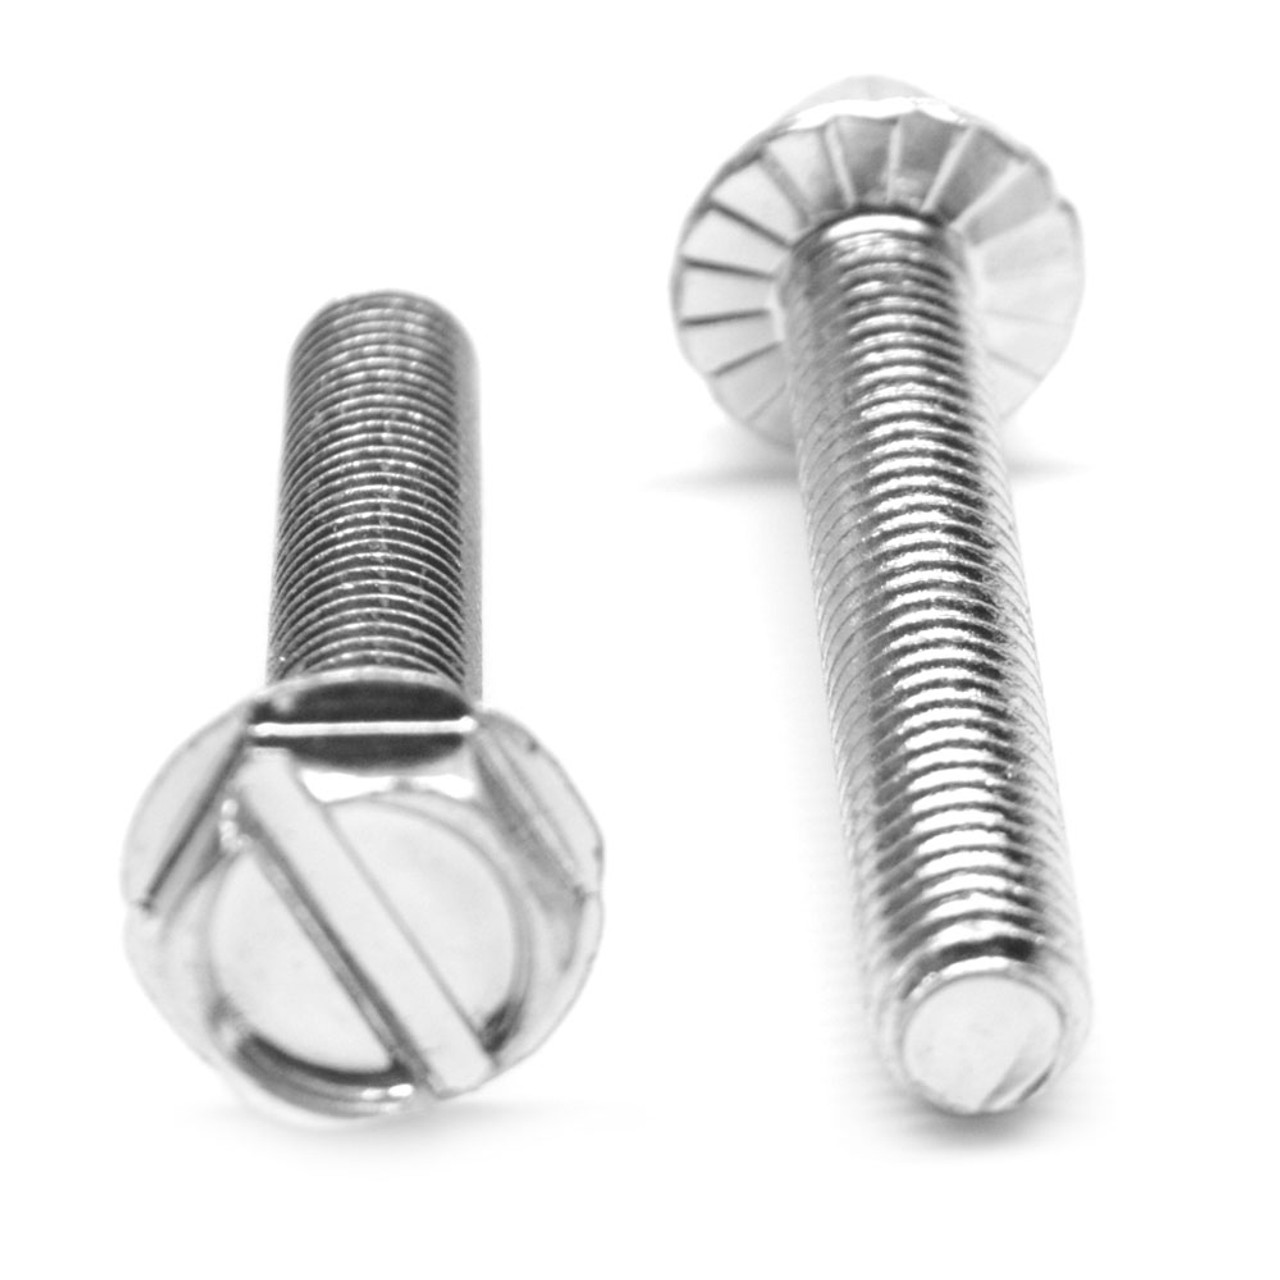 3/8-16 x 1 Coarse Thread Machine Screw Slotted Hex Washer Head with Serration Low Carbon Steel Zinc Plated